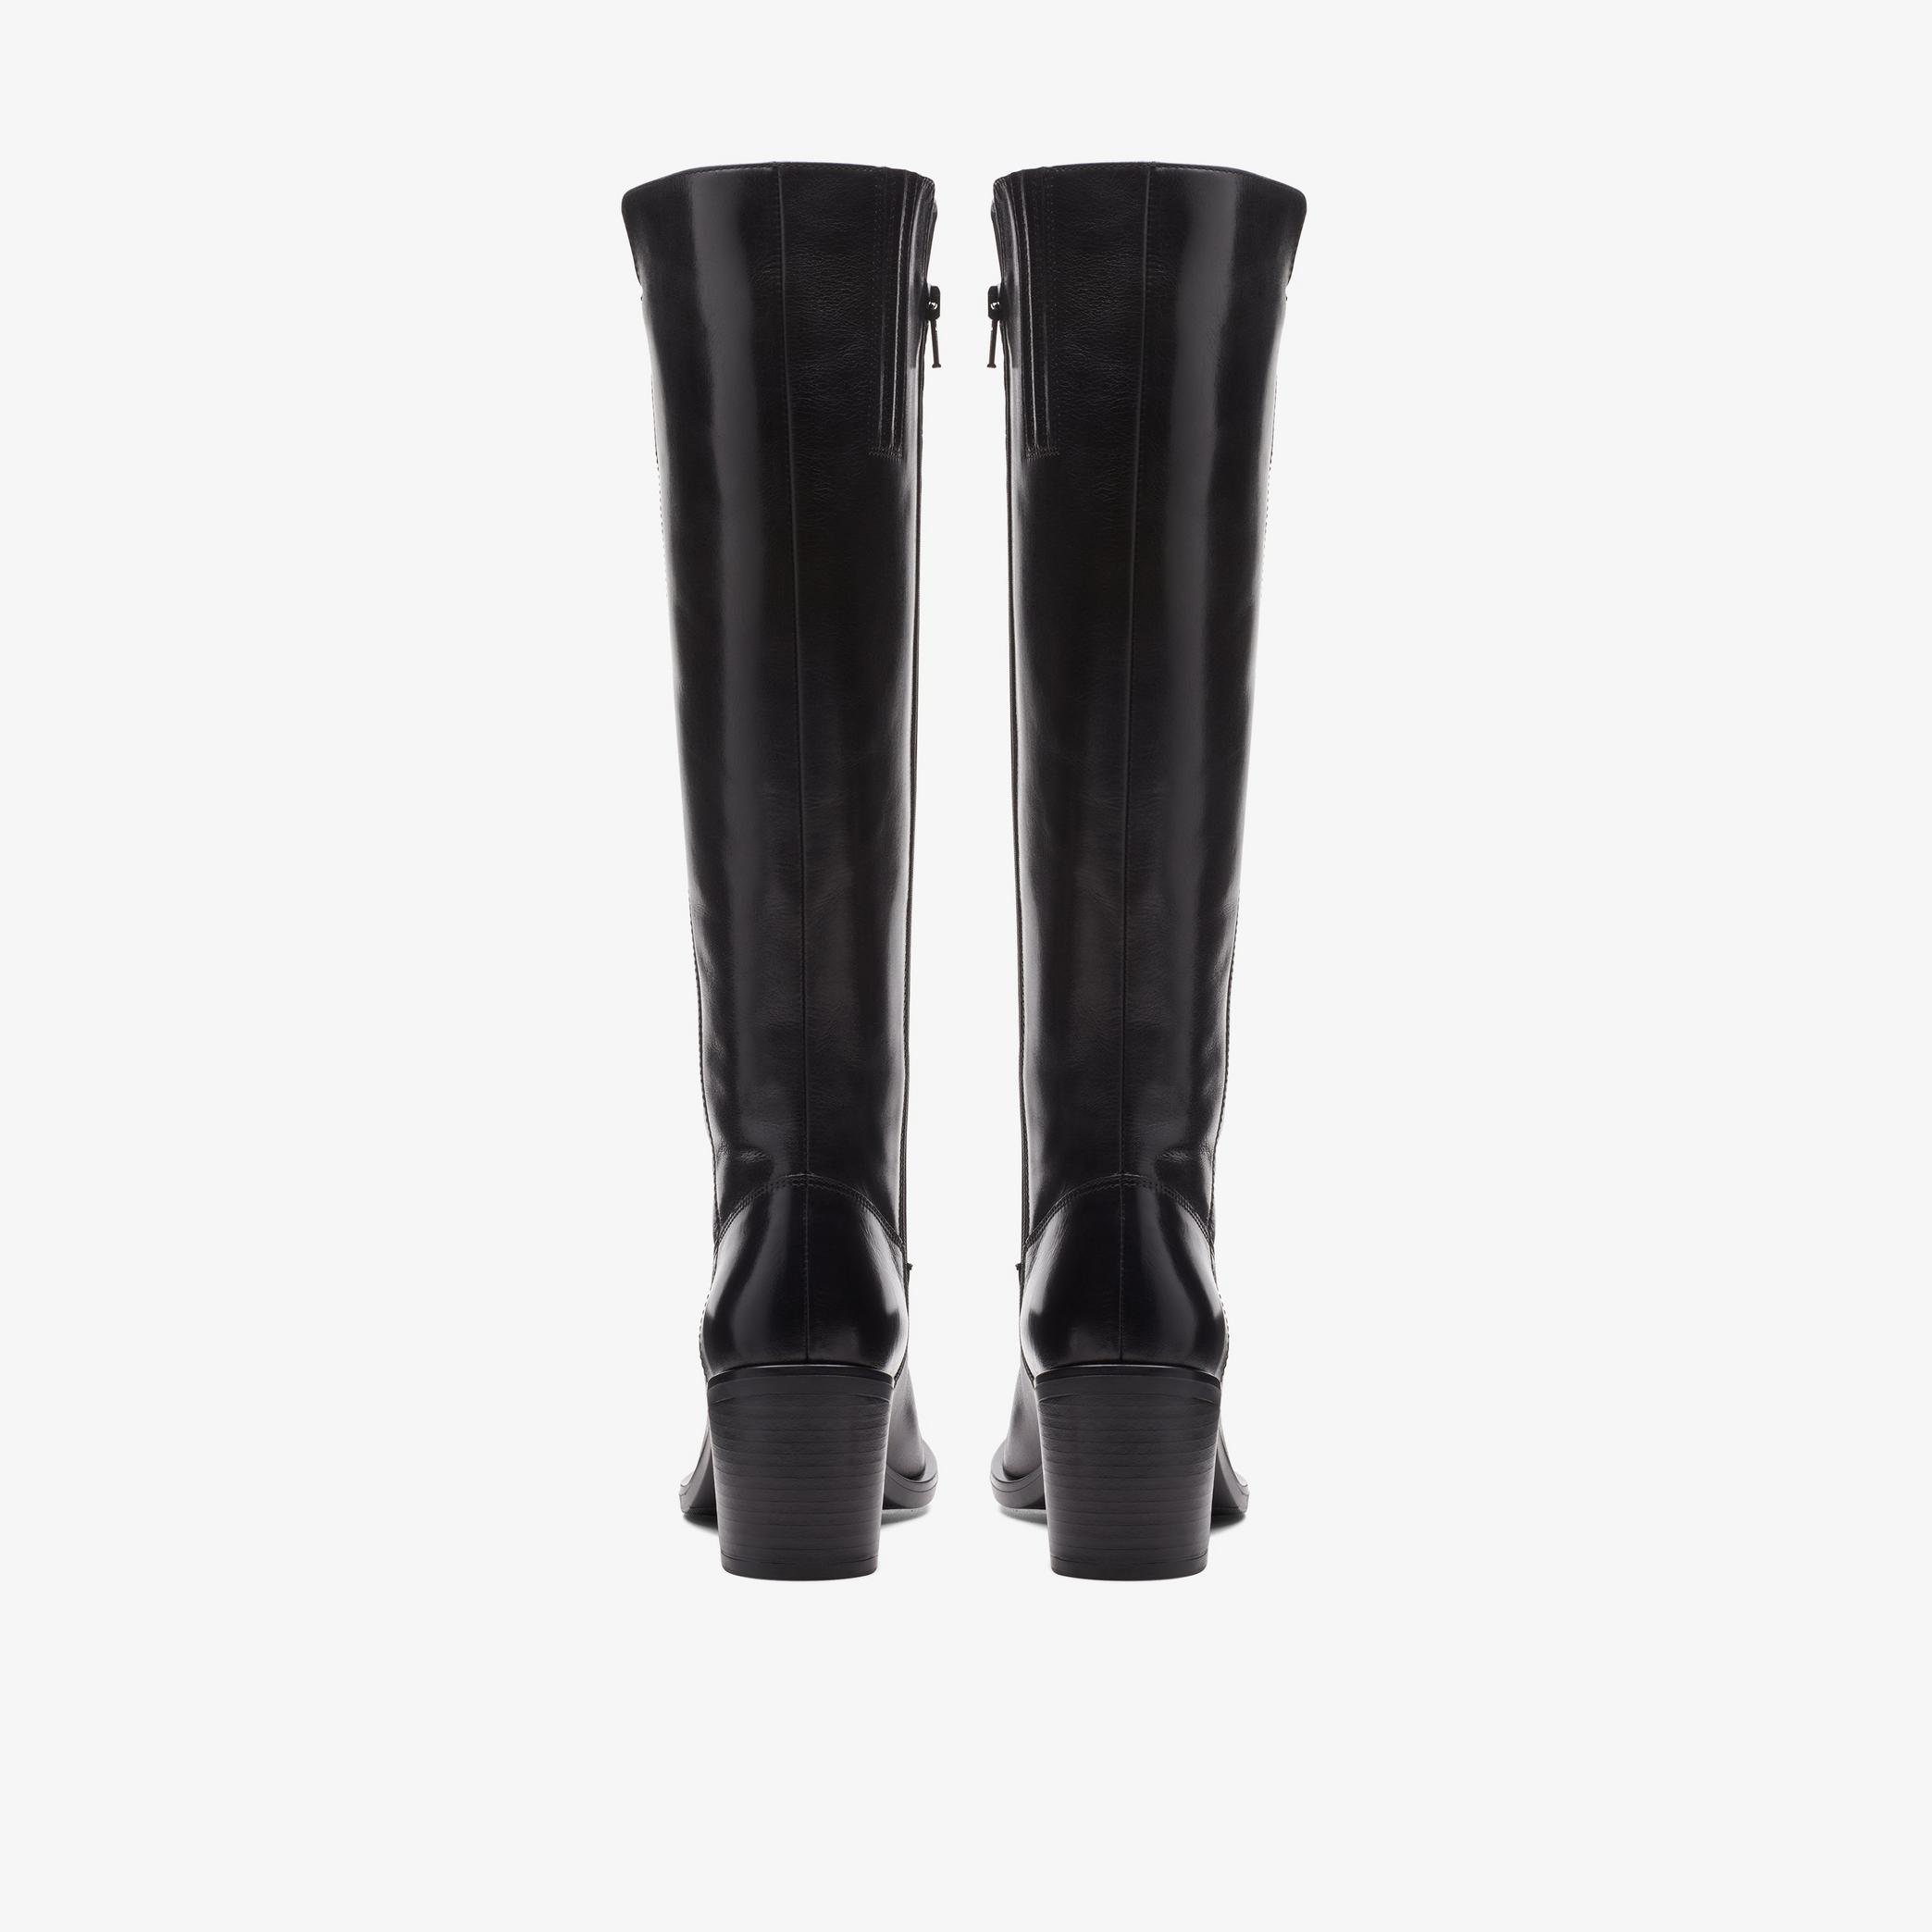 Valvestino Hi Black Leather Knee High Boots, view 6 of 6